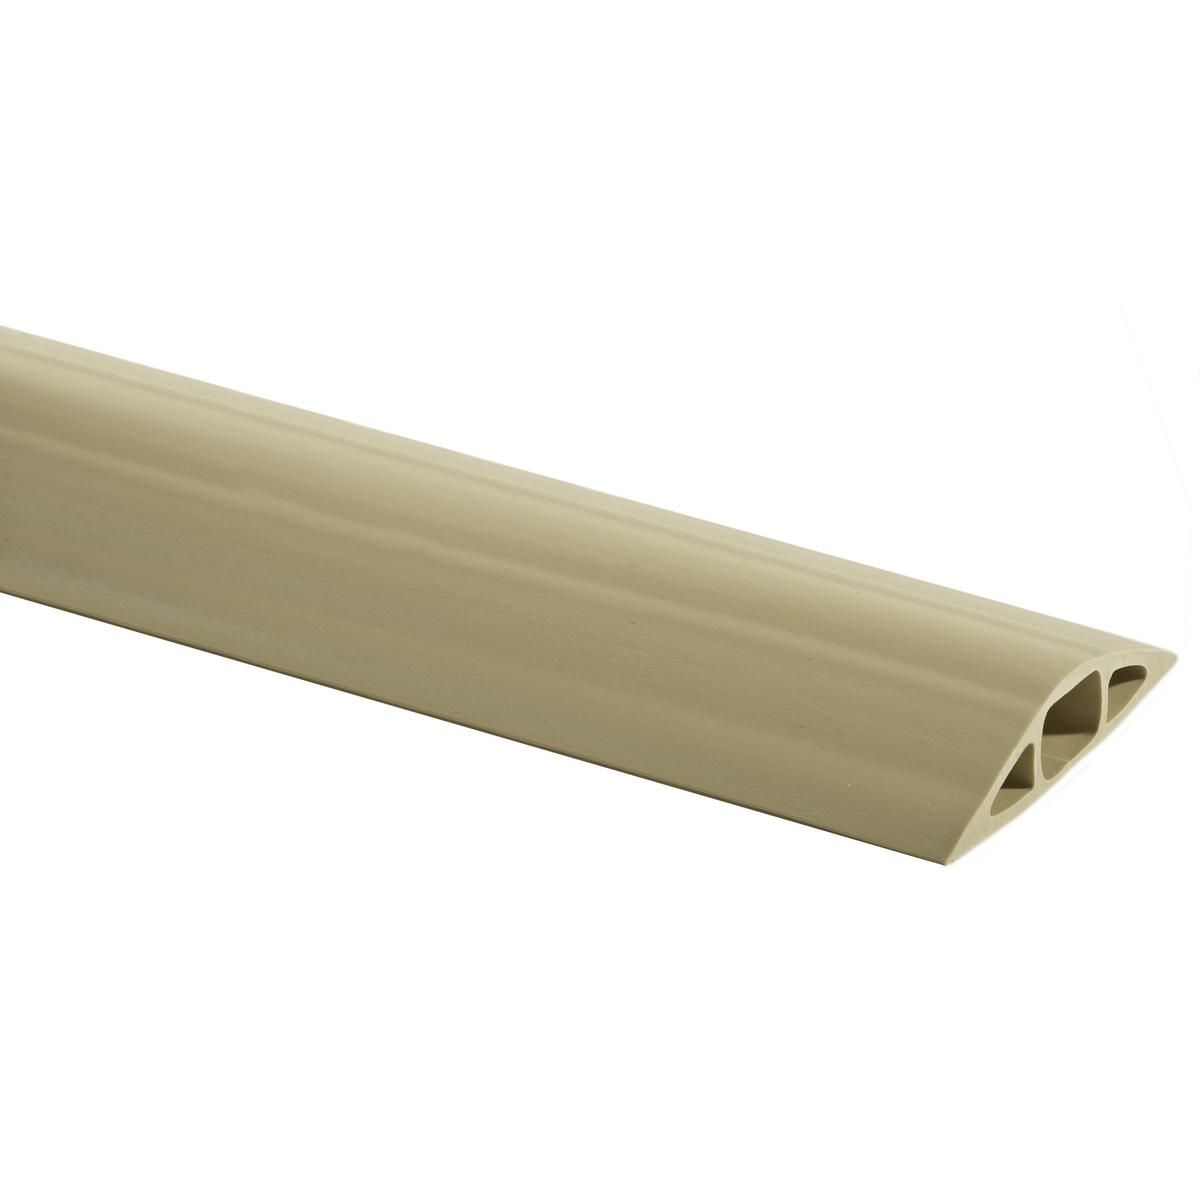 Hubbell BRYFT3BG25 FloorTrak Flexible Non-Metallic Cover for Cables, Size 3, Beige, 25' 